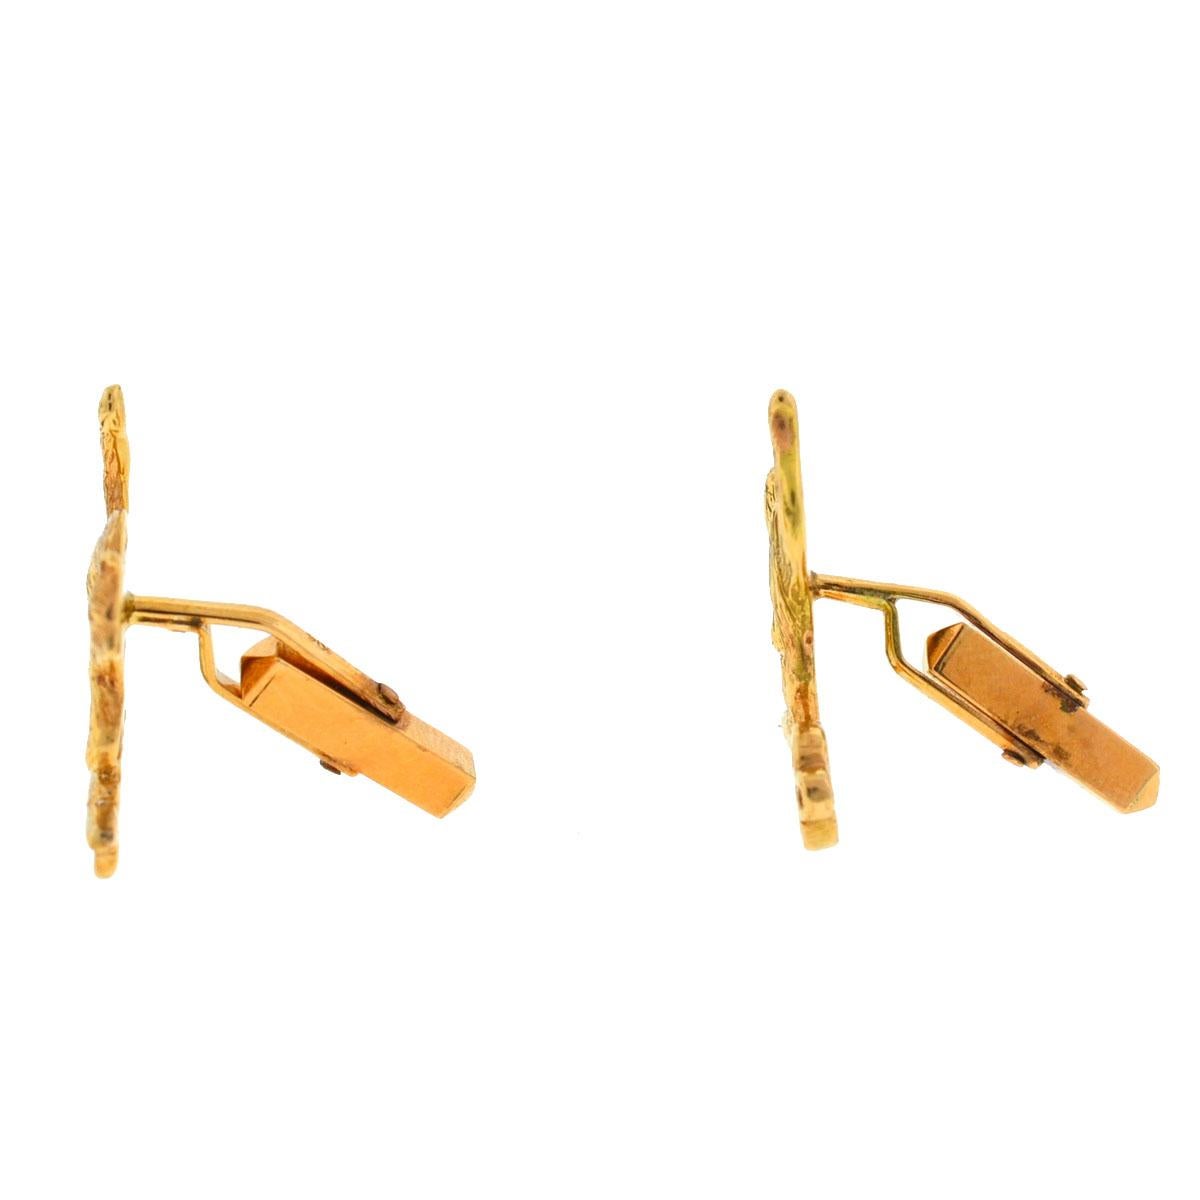 Company-N/A
Style-Cat on Key Cufflinks
Metal-14k Yellow Gold
Stones-N/A
Size-22.27 mm x 2.07 mm
Weight-11.32 Grams
Includes-Cufflinks ONLY 
SkU-2283-1TIM